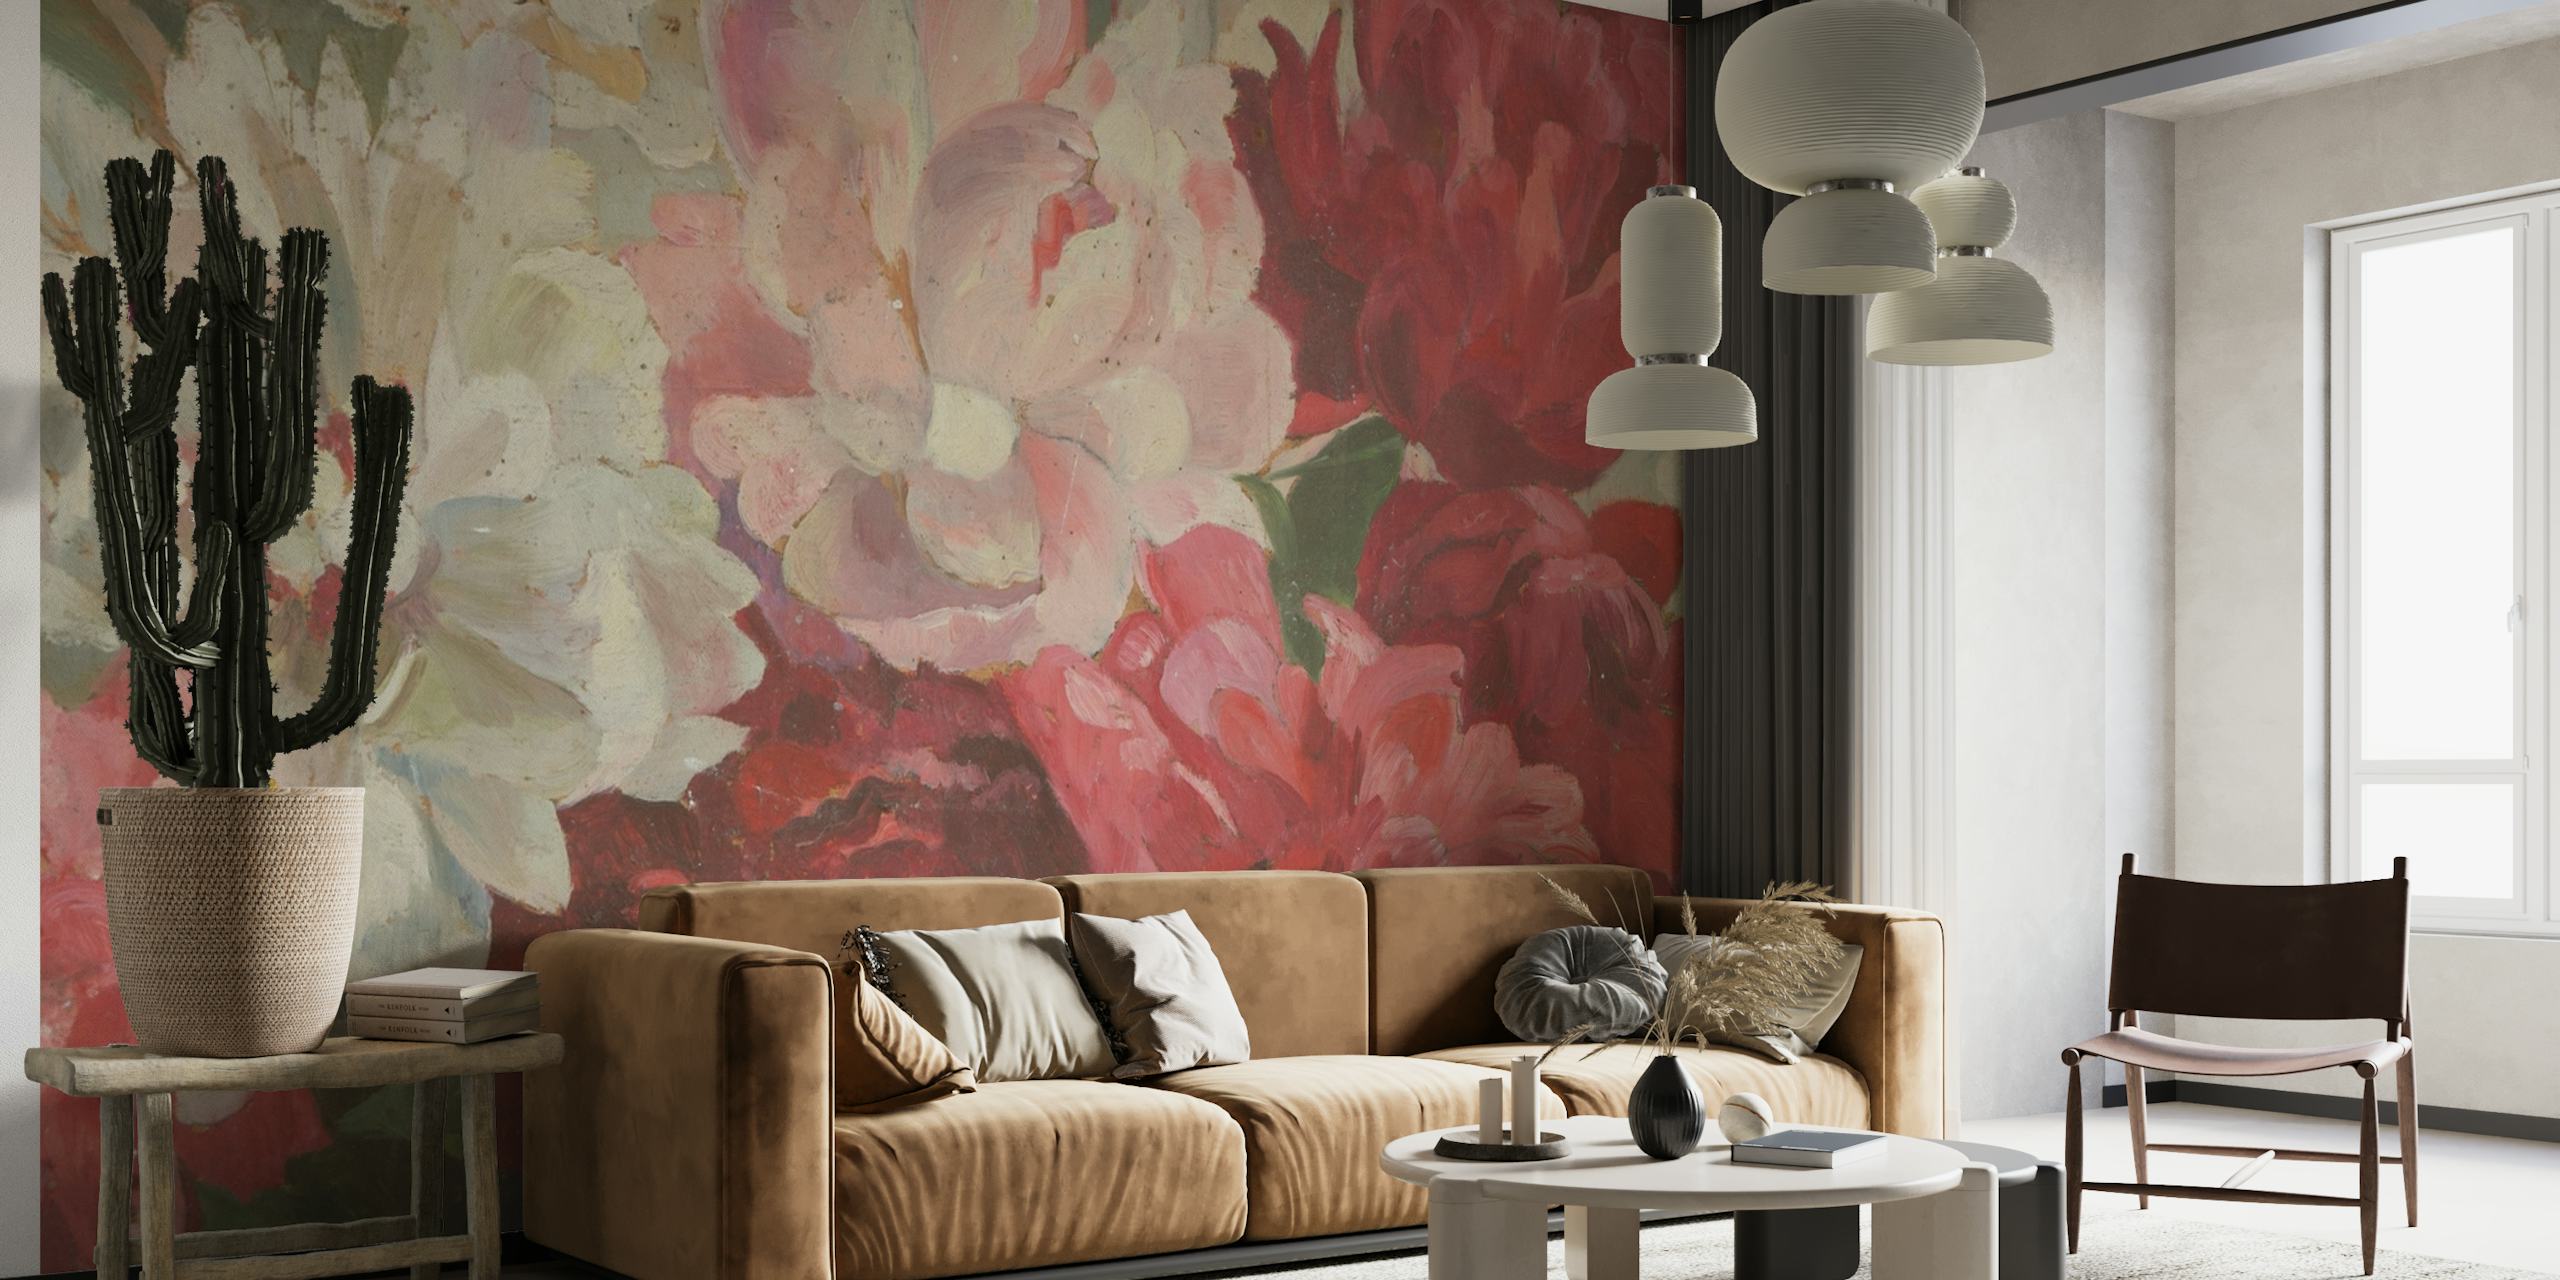 Elegant vintage flower wall mural with peonies in shades of pink and red